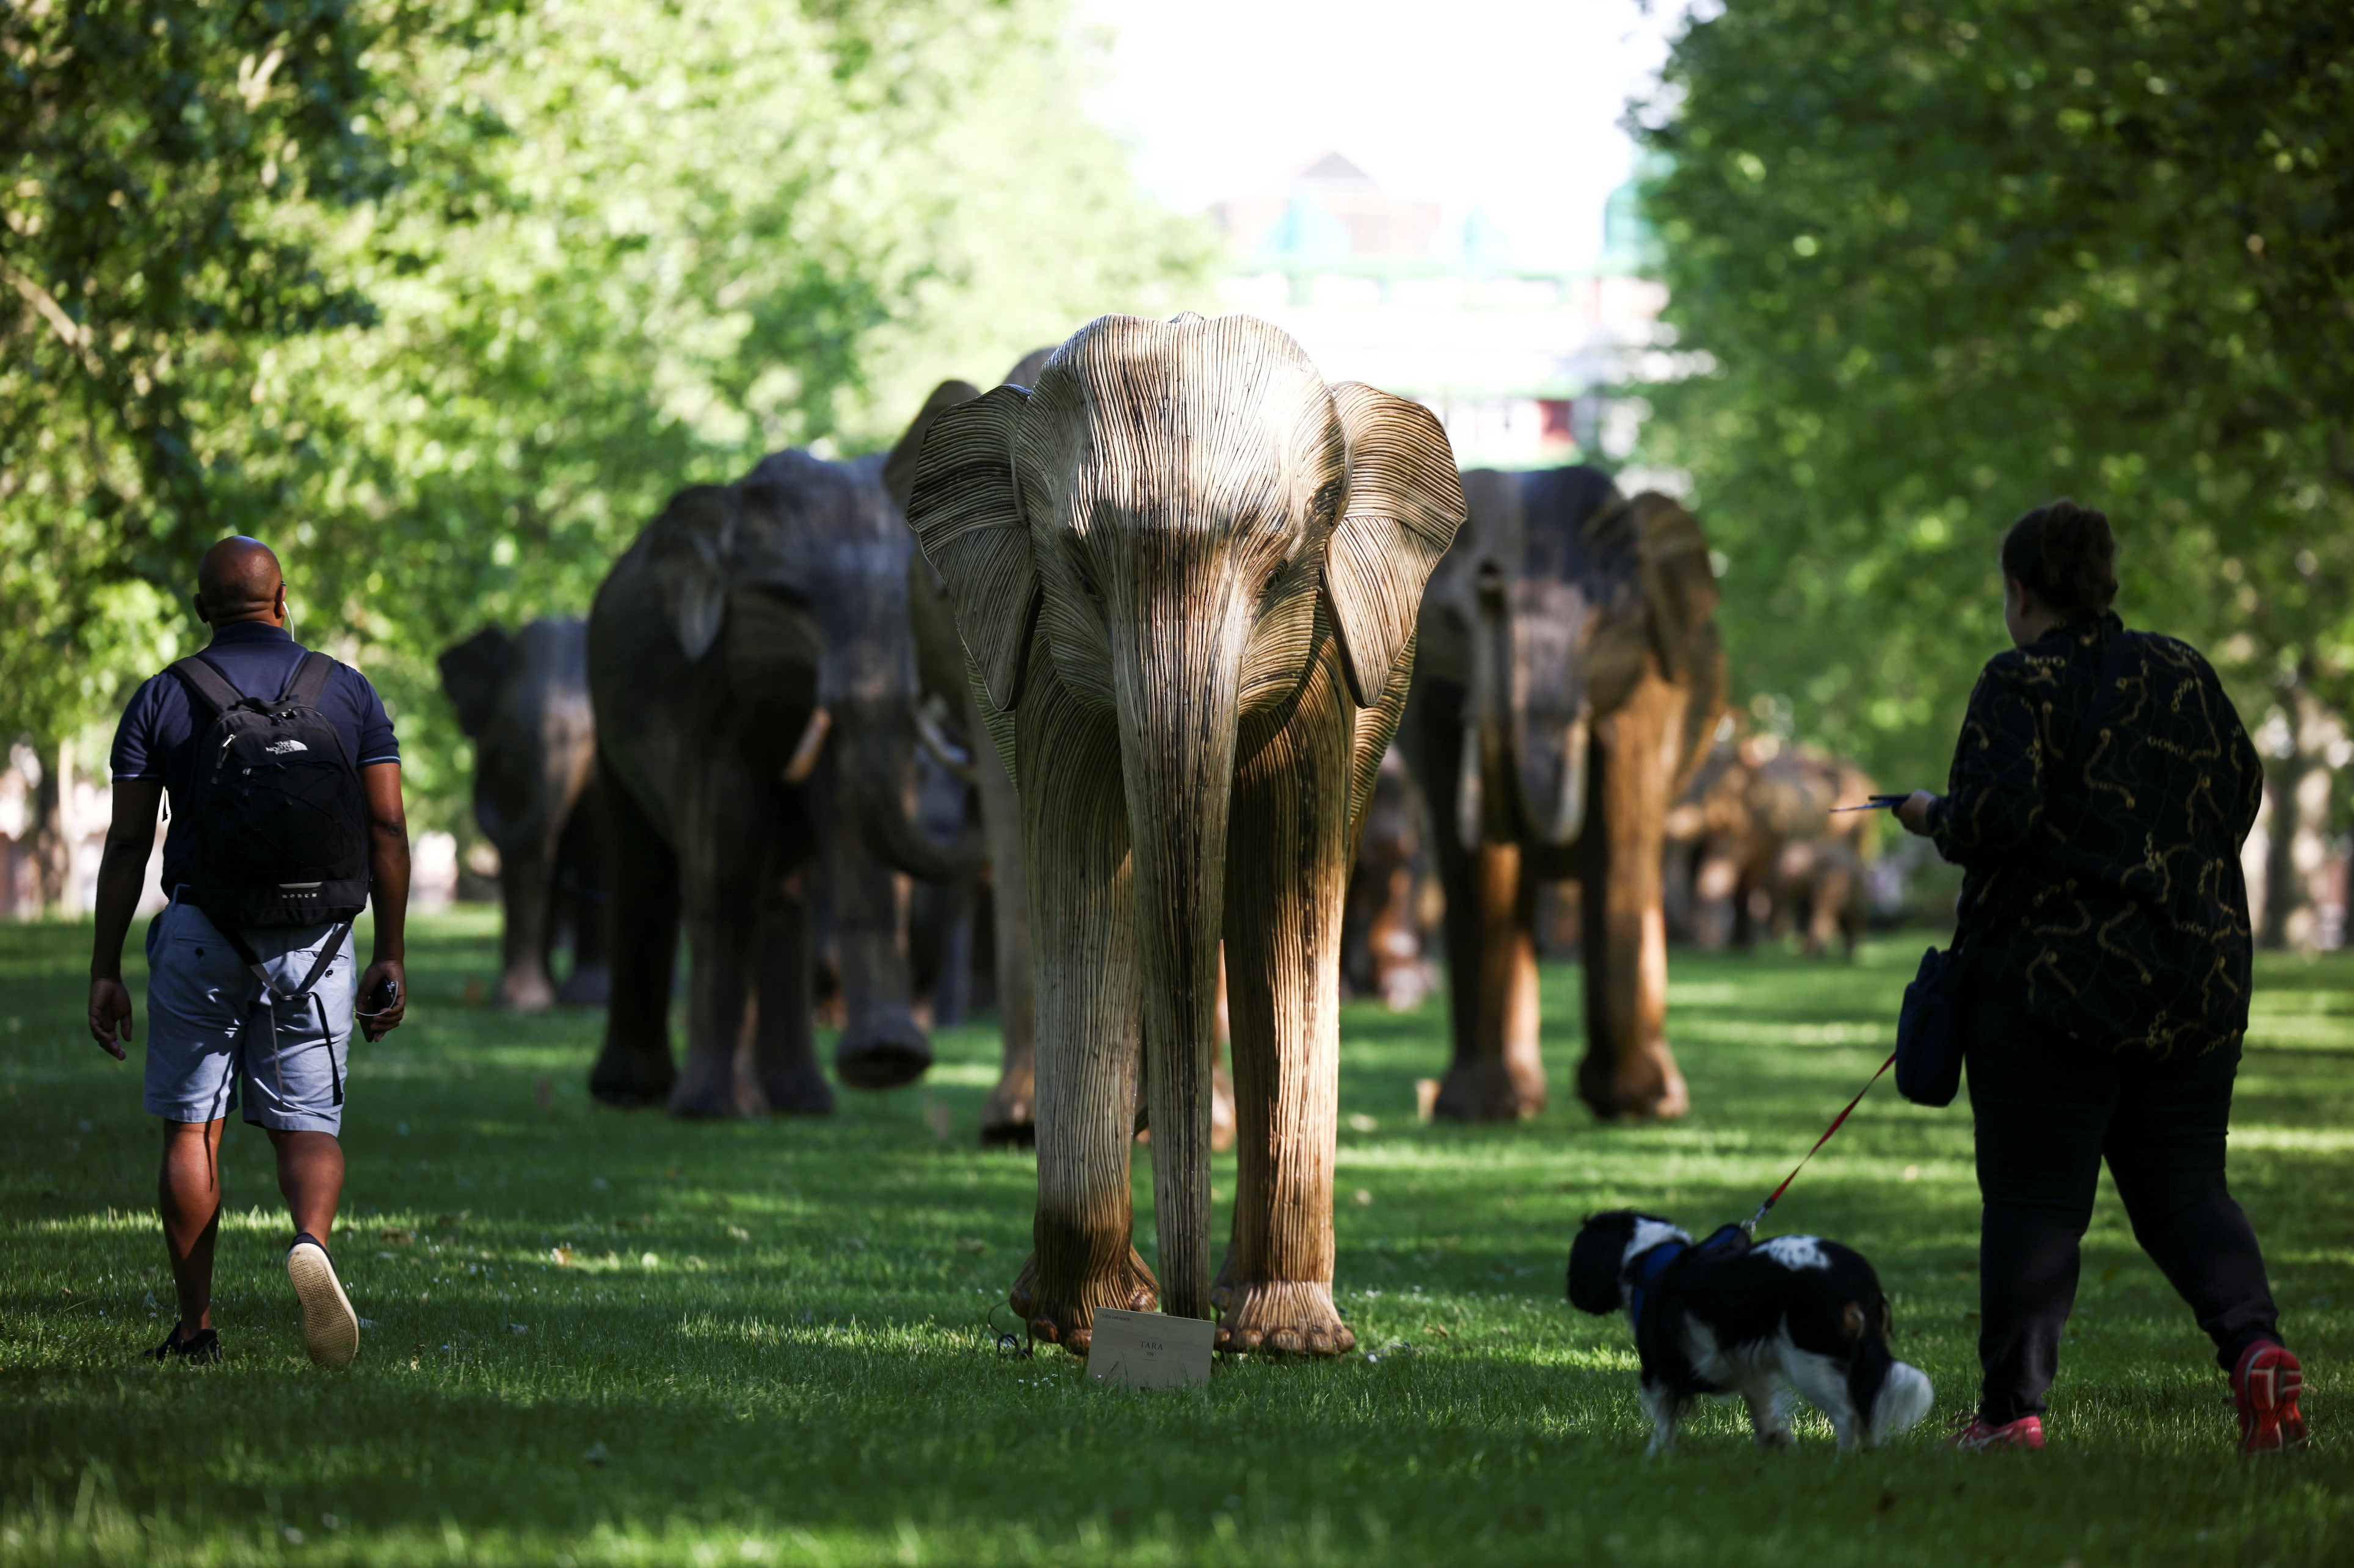 Life-size elephant sculpture exhibition in Green Park, in London